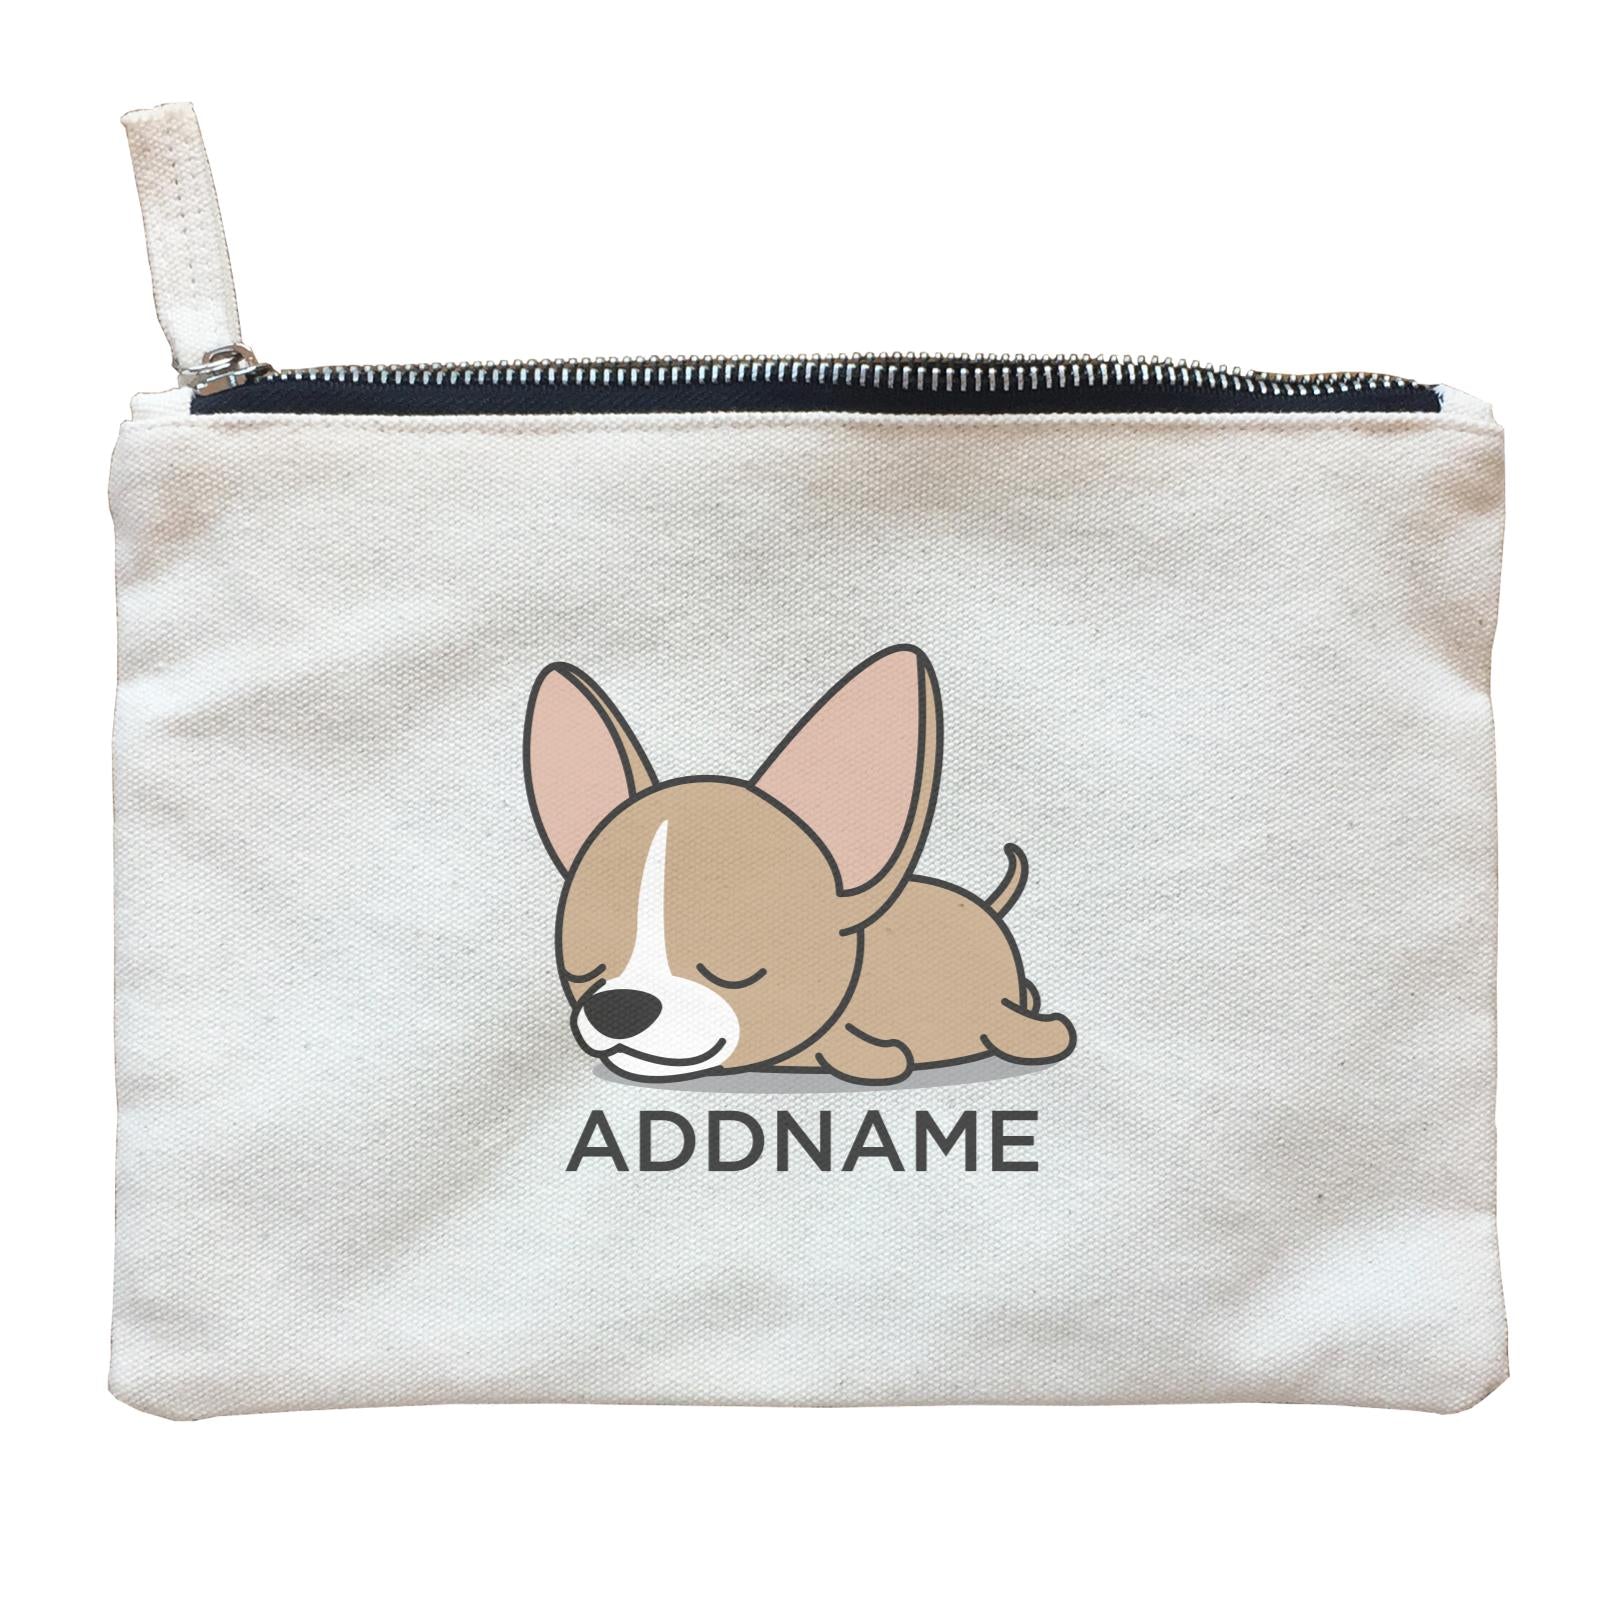 Lazy Chihuahua Dog Addname Zipper Pouch